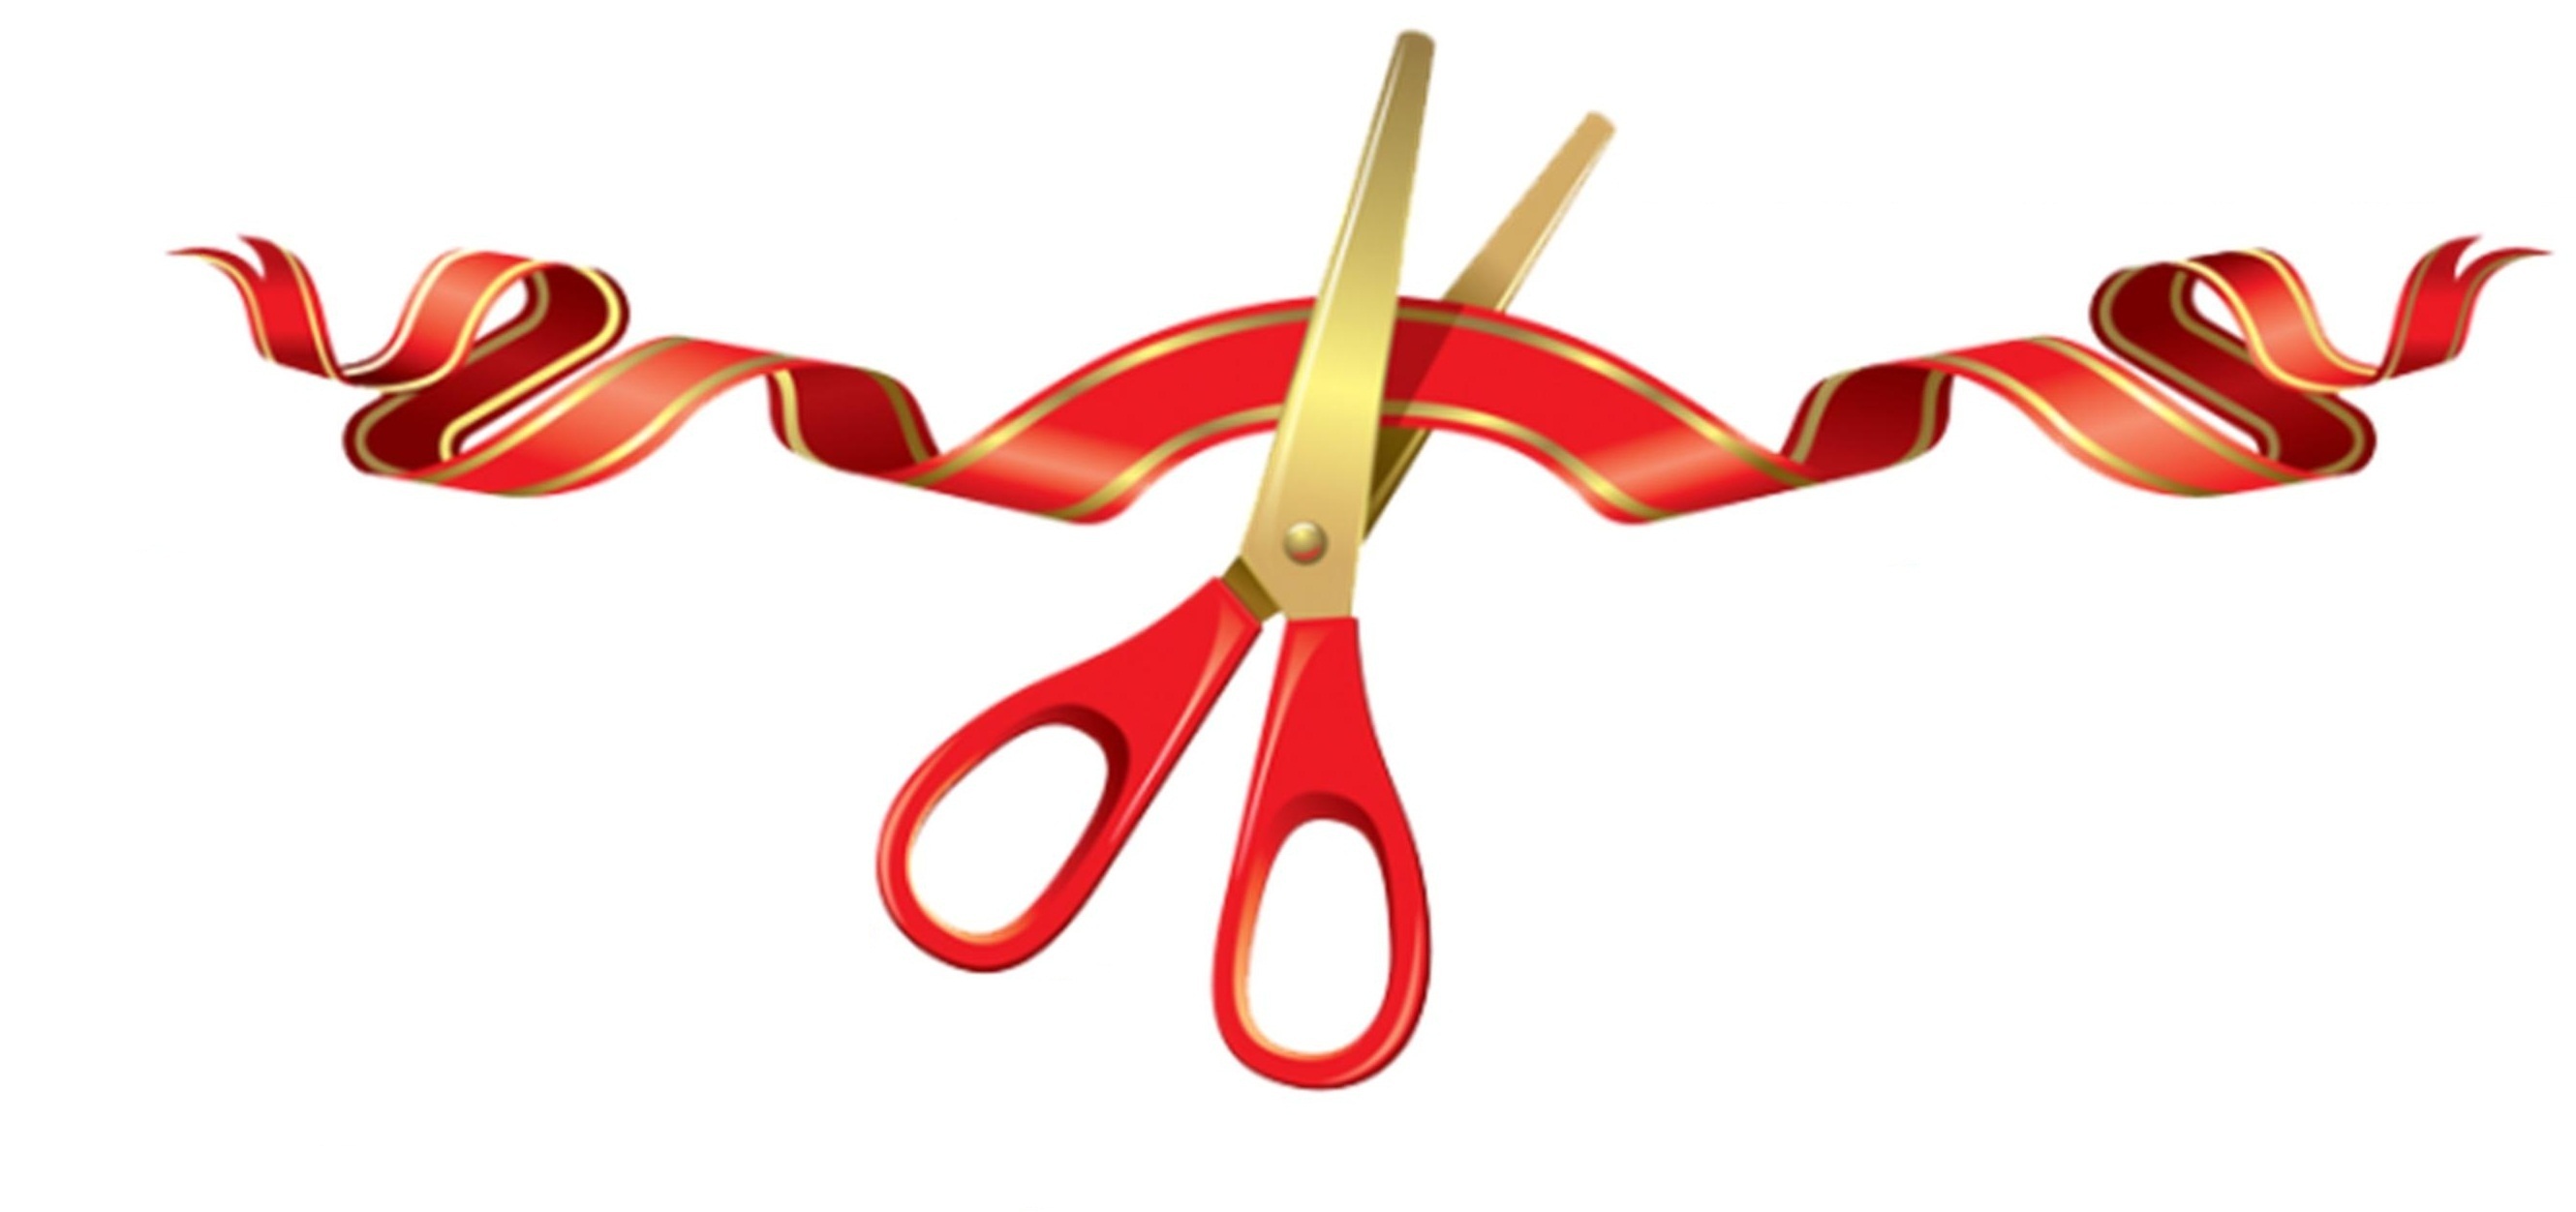 Ribbon Cutting Clipart   Free Clip Art Images